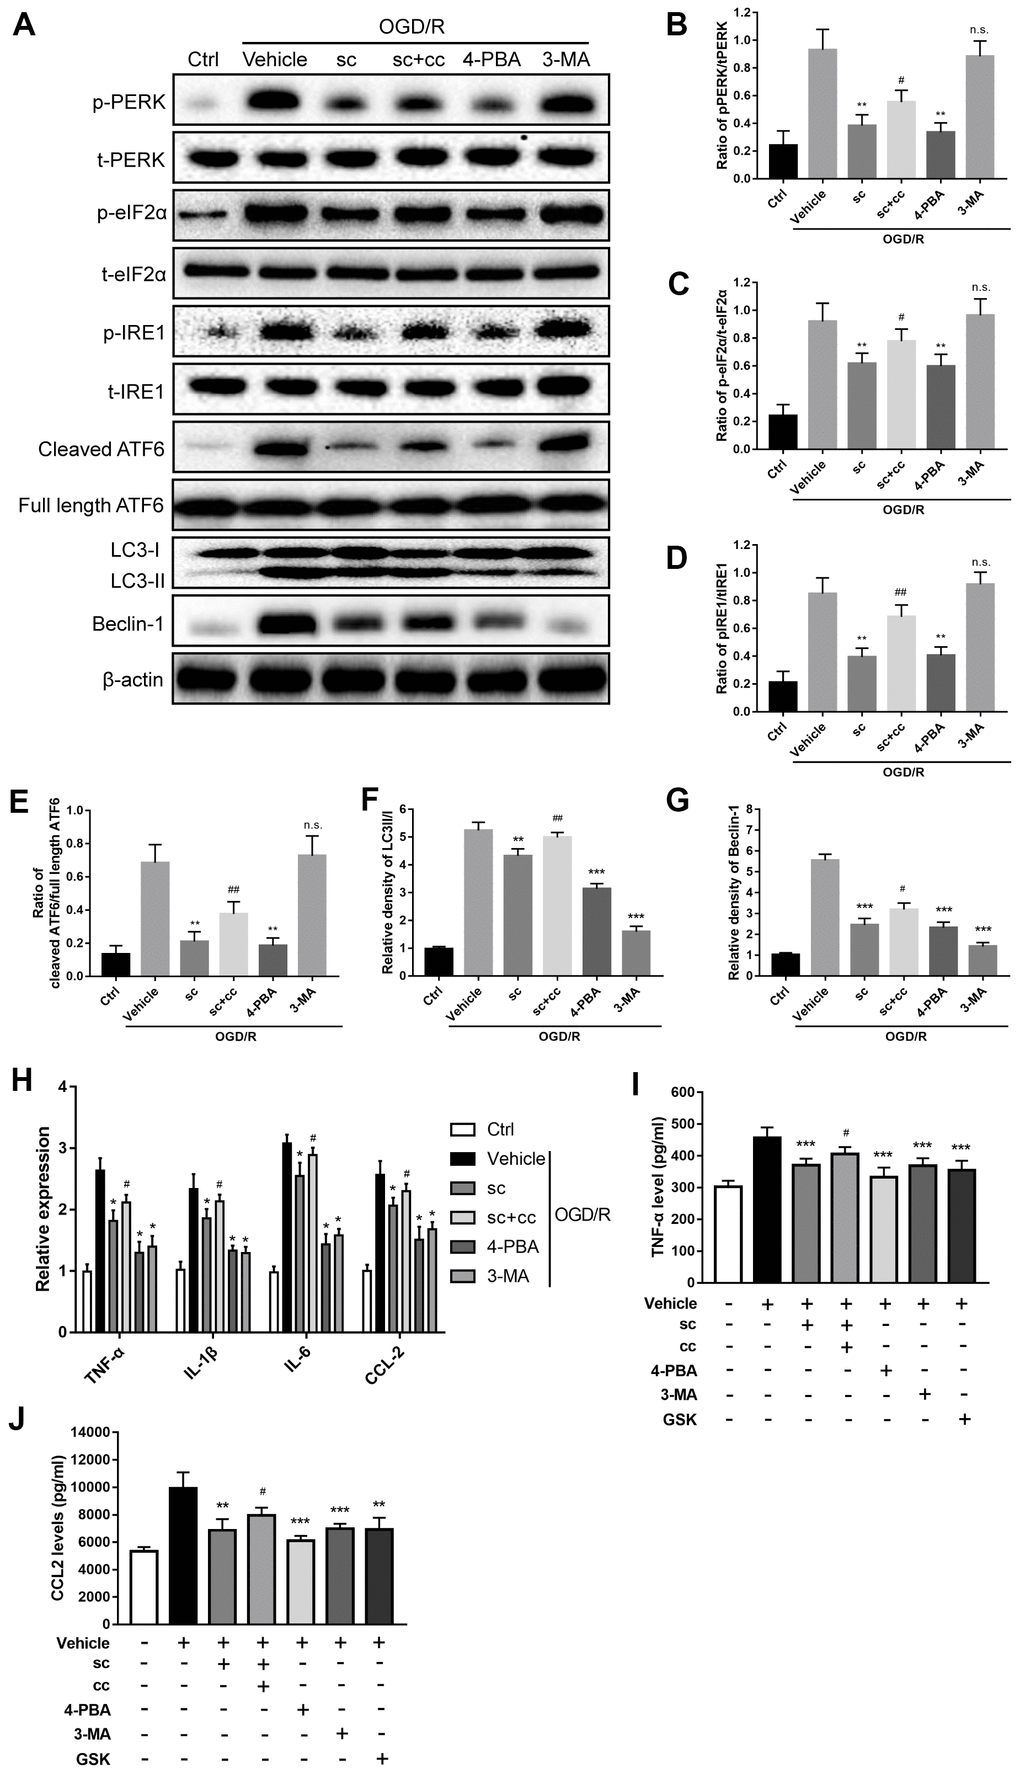 PTP1B inhibitor mitigated oxygen glucose deprivation/reoxygenation (OGD/R)-induced microglial activation by inhibiting ER stress-dependent autophagy via PERK signaling. (A) The PTP1B inhibitor, sc-222227, 4-PBA, and 3-MA were used to specifically inhibit PTP1B, ER stress, and autophagy in primary microglia, respectively. CCT020312 was used to activate PERK. GSK2606414 was used to inhibit PERK. Western blots were performed to detect p-PERK, PERK, p-eIF2α, eIF2α, p-IRE1, IRE1, cleaved ATF6, full length ATF6, LC-3I/II, and beclin-1 in primary microglia after OGD/R insult. (B–G) Quantitative results of the band density ratio of phosphor-PERK/total-PERK, phospho-eIF2α/total- eIF2α, phospho-IRE1/total-IRE1, and cleaved ATF6/full length ATF6; the relative band density of LC3II/I and beclin-1 are normalized to β-actin. The results are presented as the mean ± SEM (n = 4 per group). (H) Real-time PCR results showing the relative expression of TNF-α, IL-1β, IL-6, and CCL2 in primary microglia in response to treatment with PTP1B inhibitor, PTP1B inhibitor+PERK activator, 4-PBA, 3-MA, and PERK inhibitor after OGD/R insult. Data are normalized to β-actin and presented as the means ± SEM (n = 4 per group). (I, J) ELISA assay to detect expression of secreted TNF-α and CCL2 in primary microglia supernatant 24 h after OGD/R insult. Data are expressed as the means ± SEM (n = 4 per group). *p p p p p p 